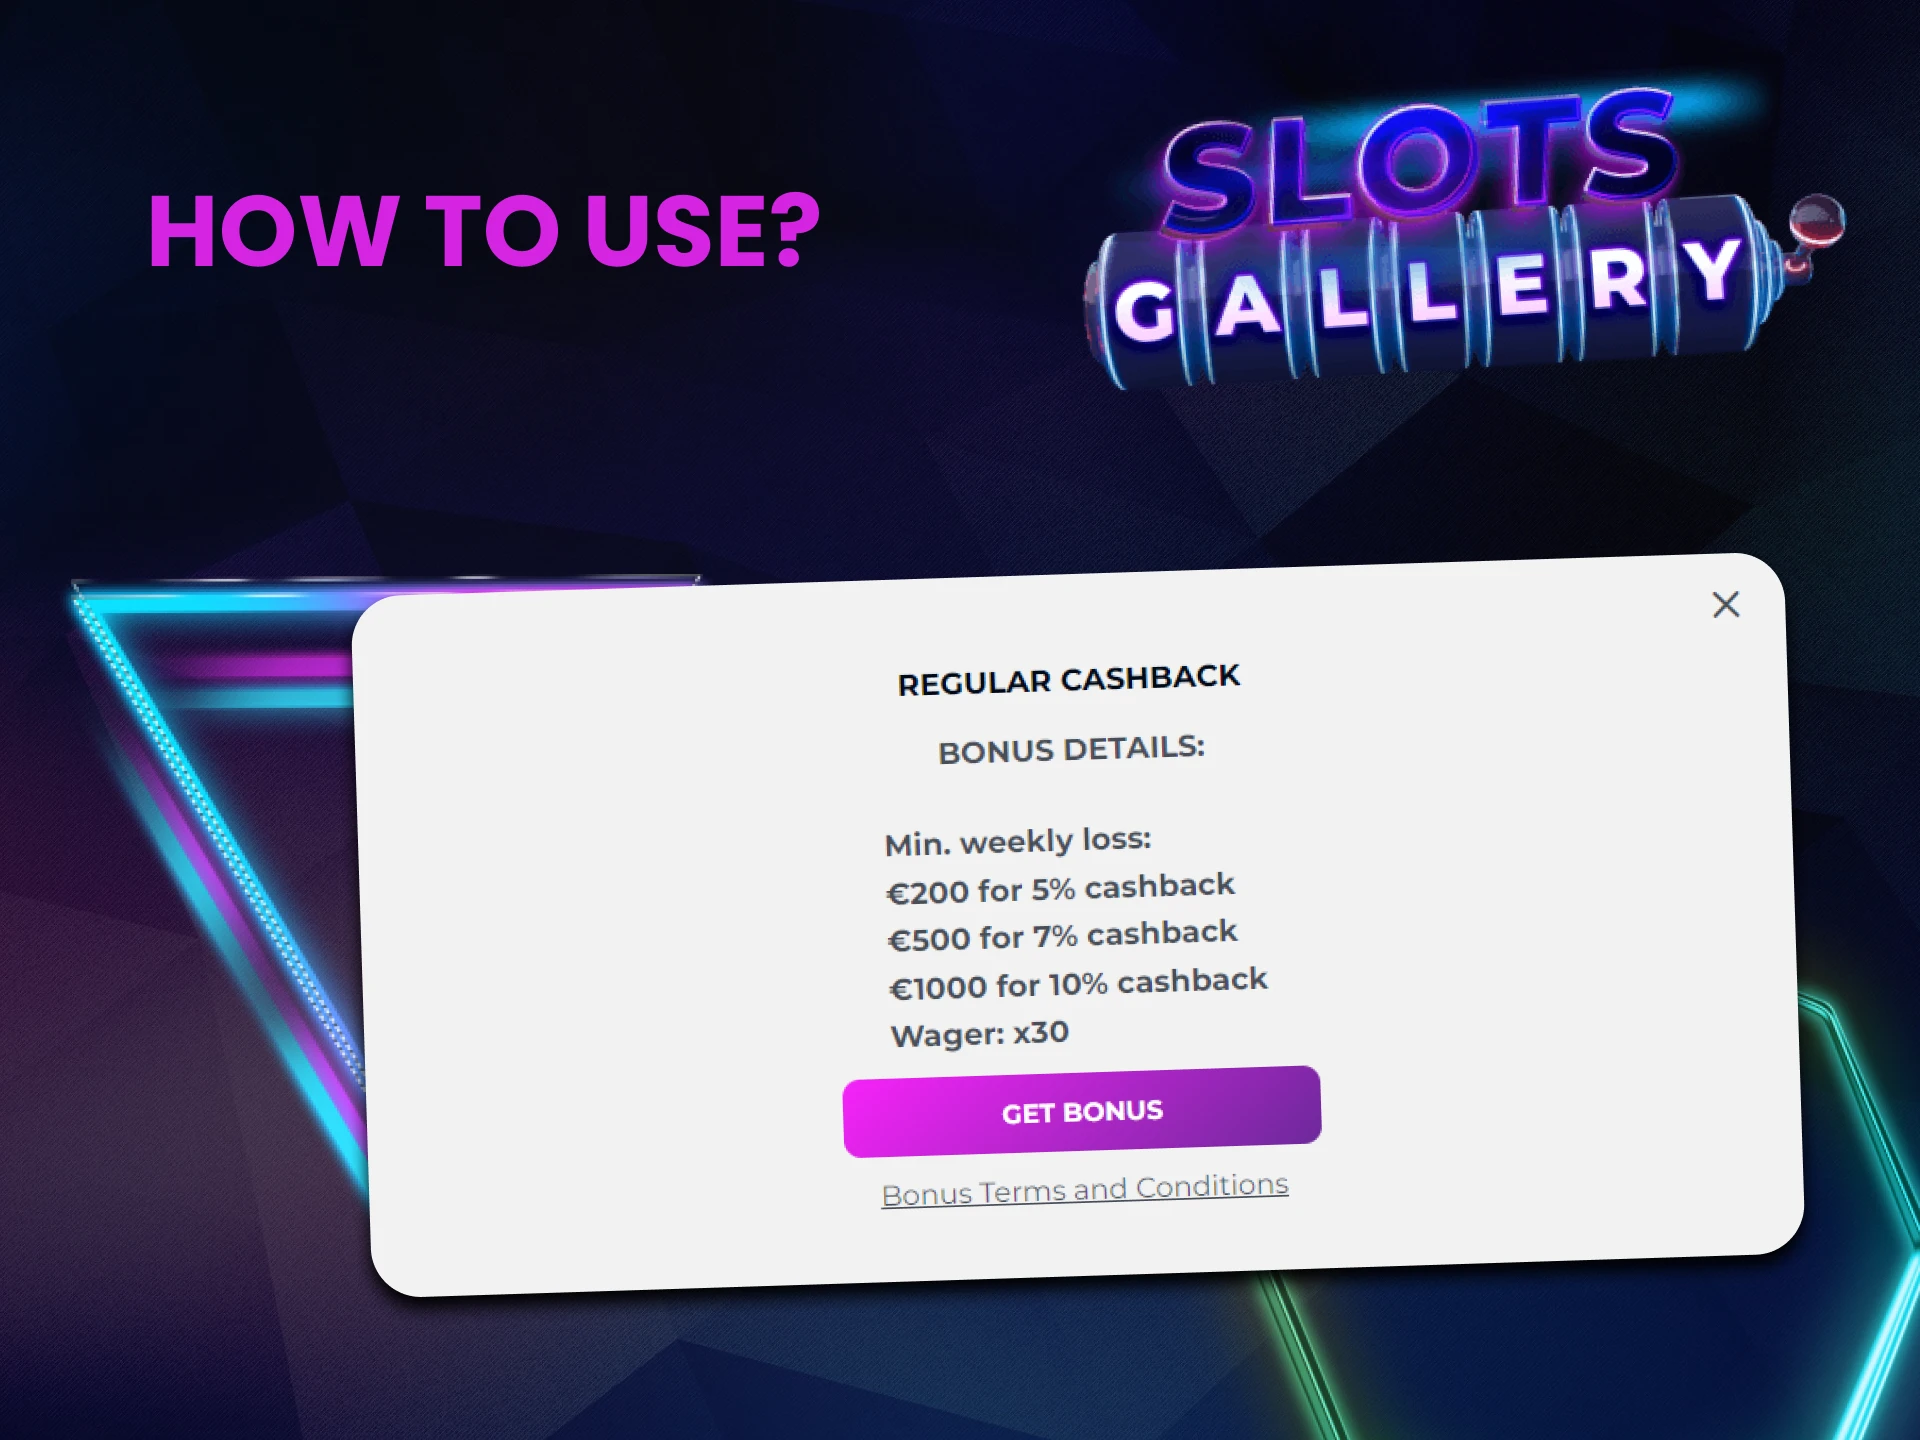 We will tell you how to use bonuses on SlotsGallery.